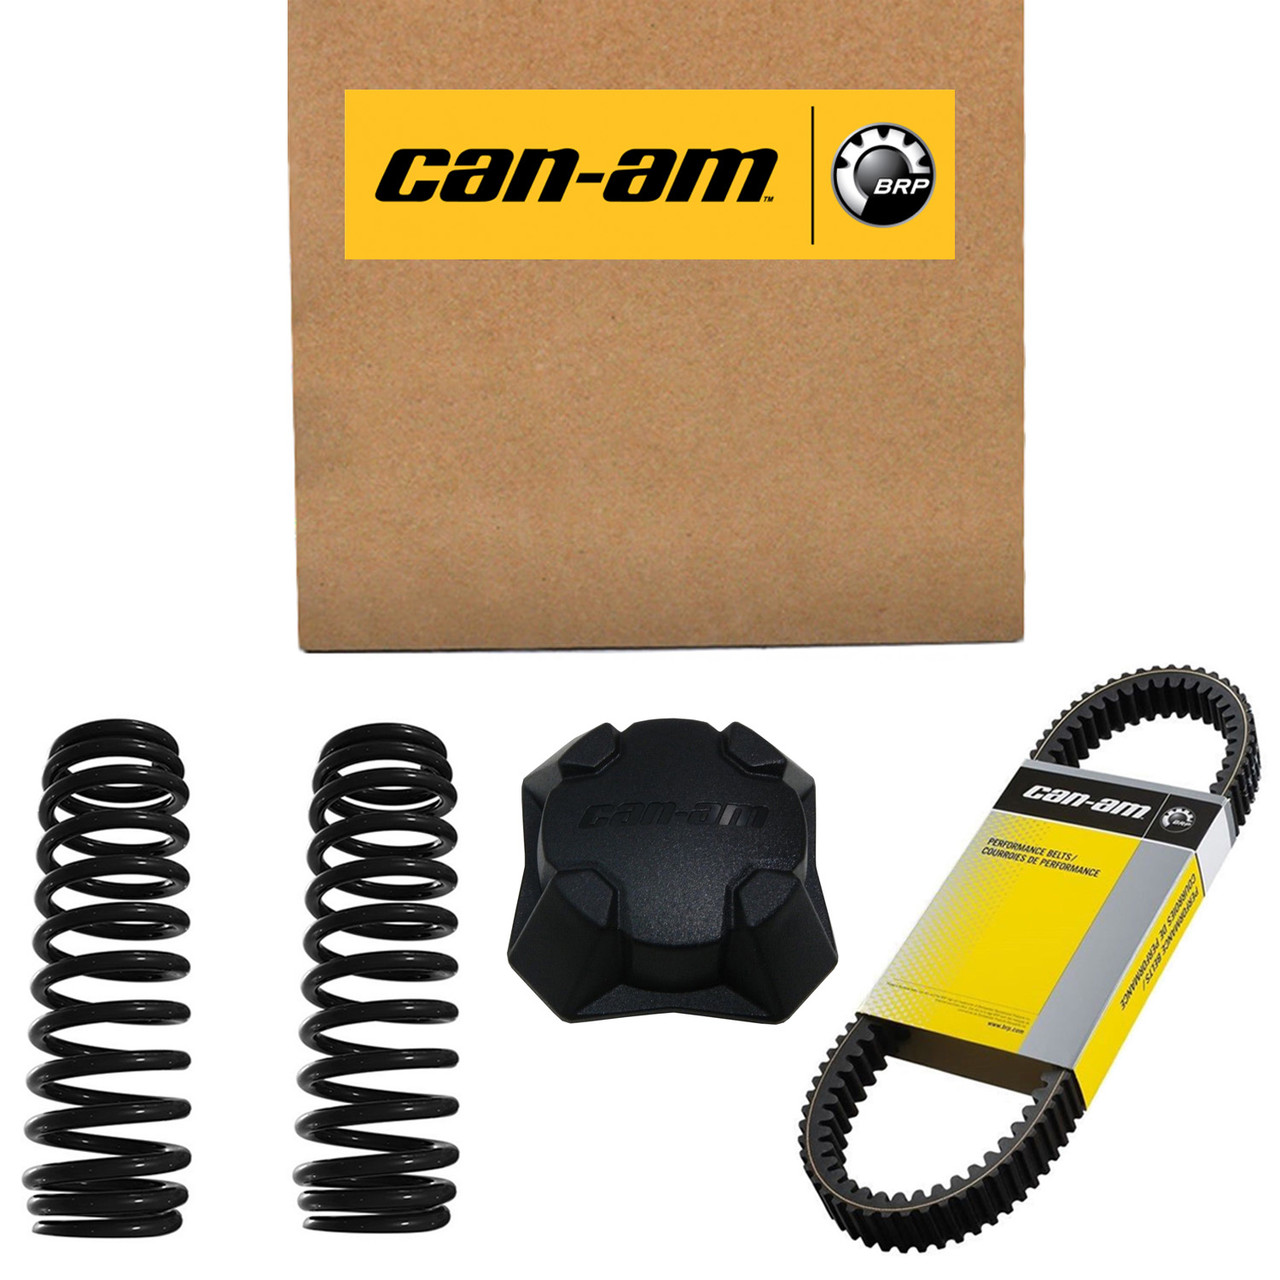 Can-Am New OEM Seal-Oil, 420650683